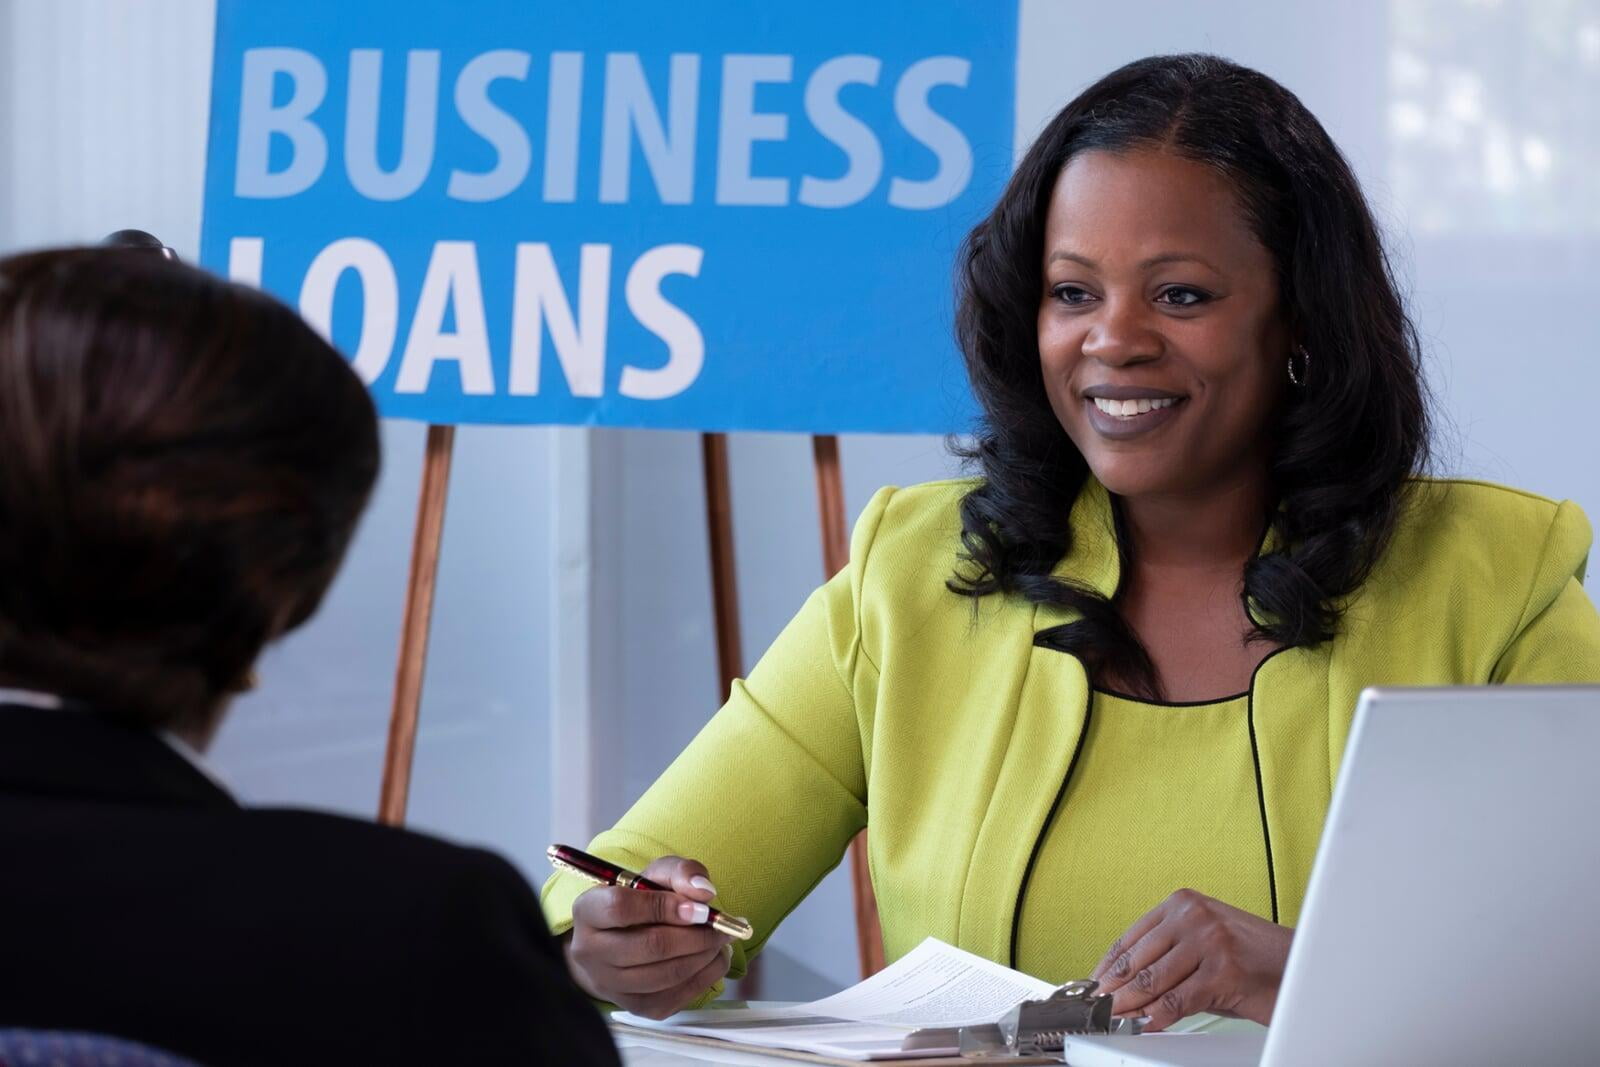 Demystifying Small Business Loans for First-Time Small Business Owners